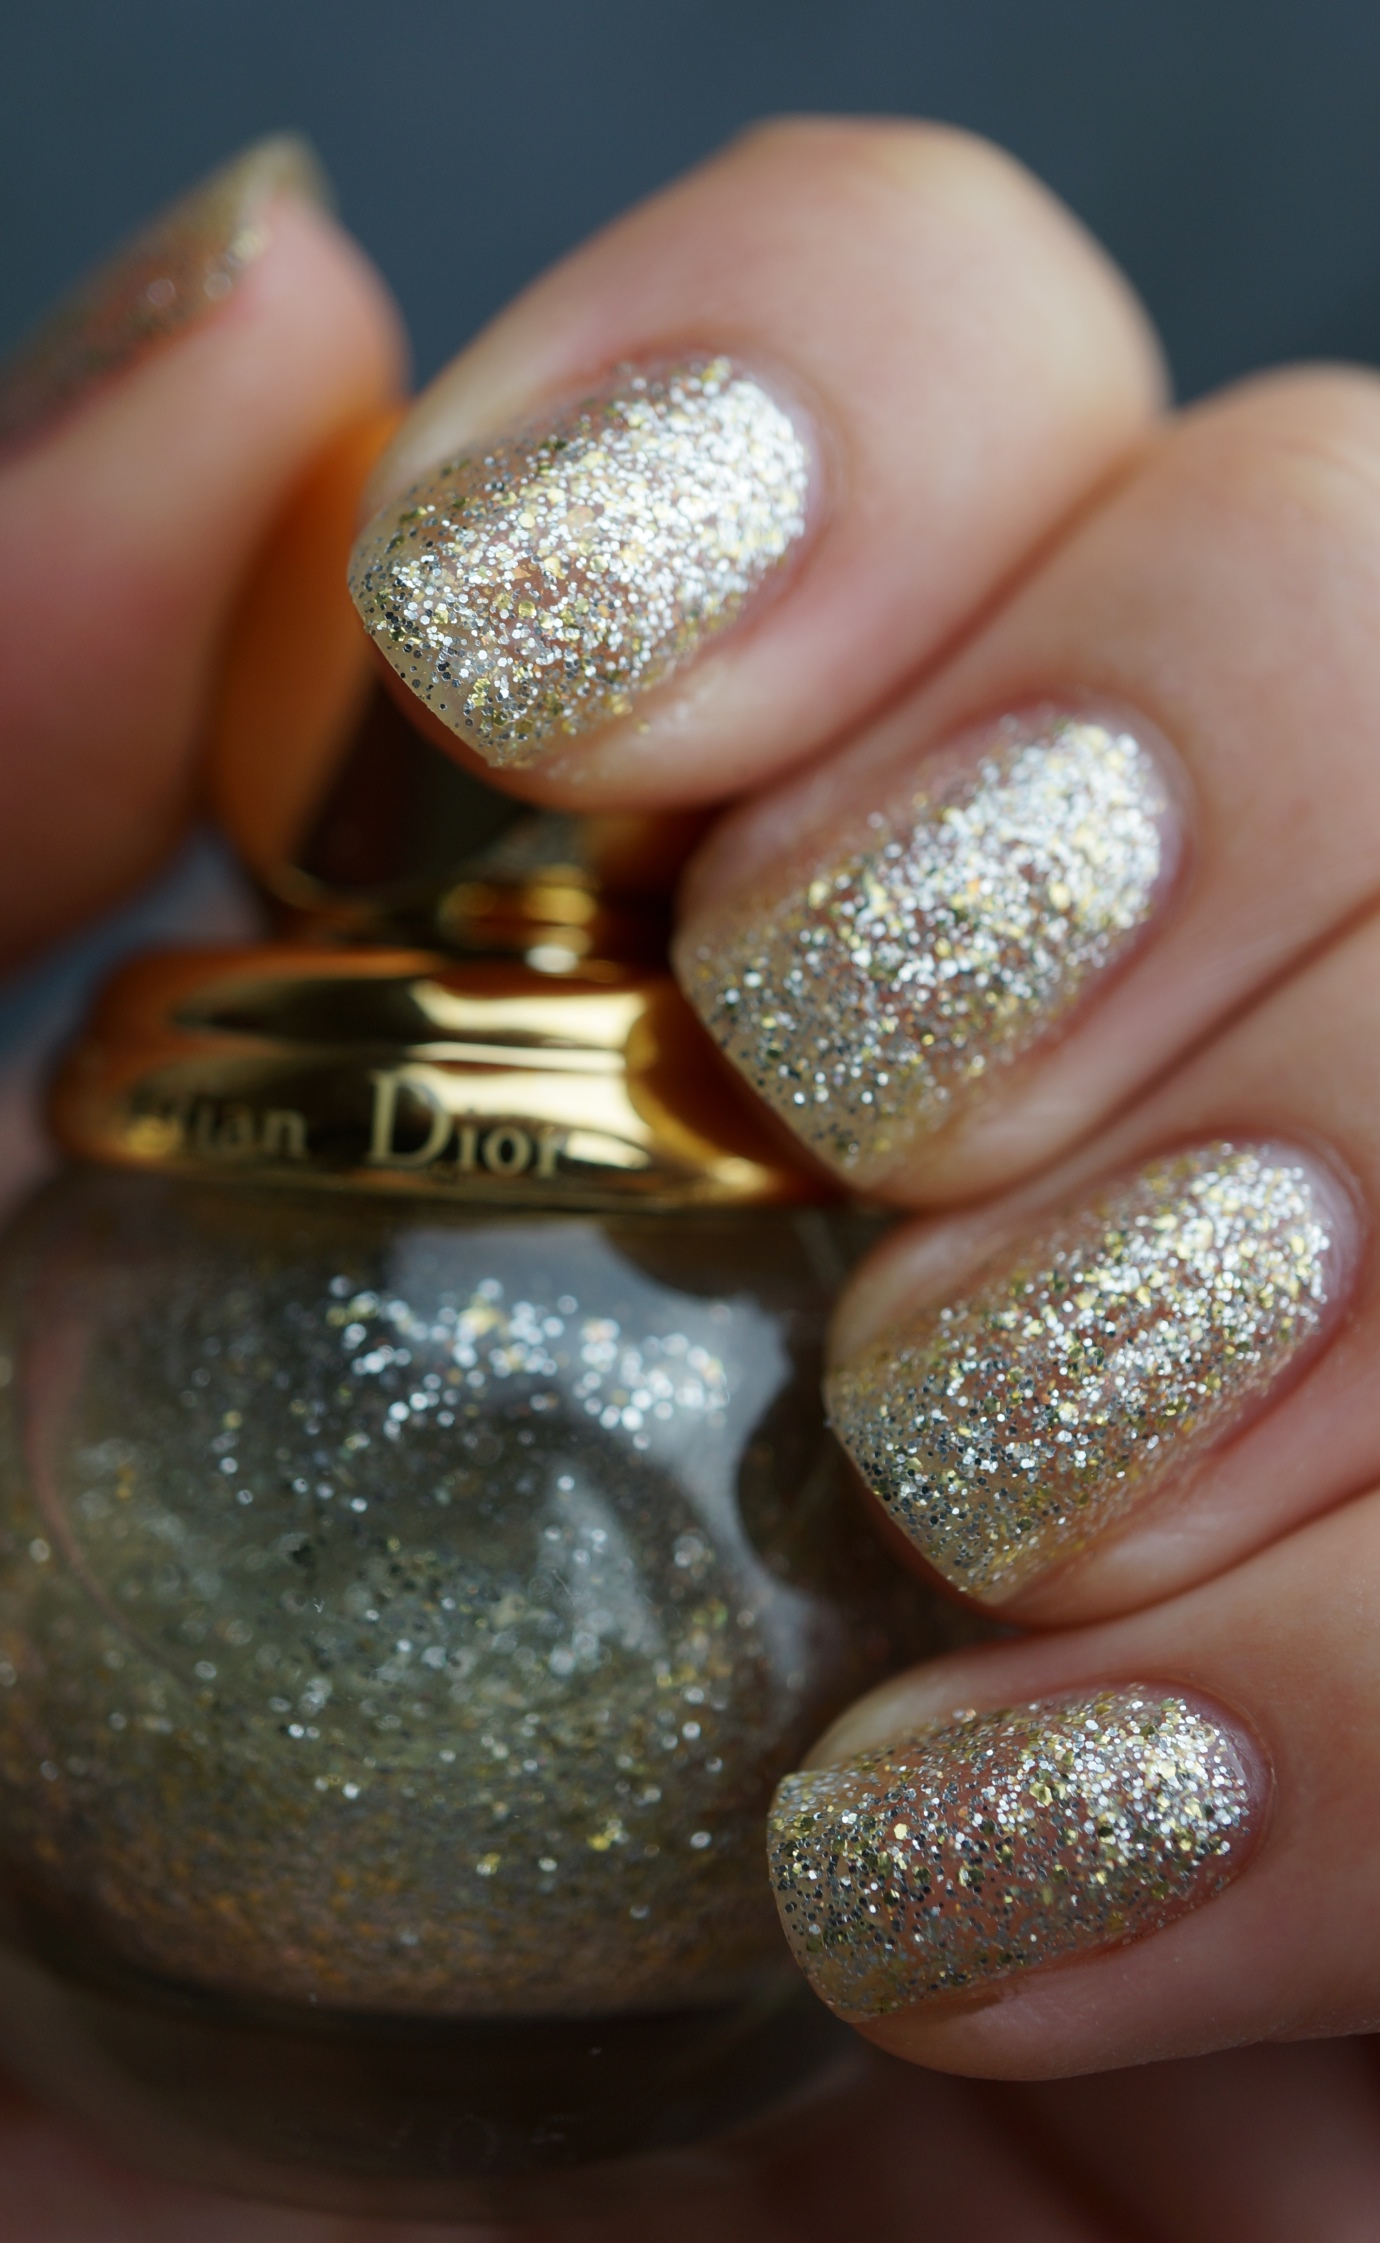 Dior State of Gold